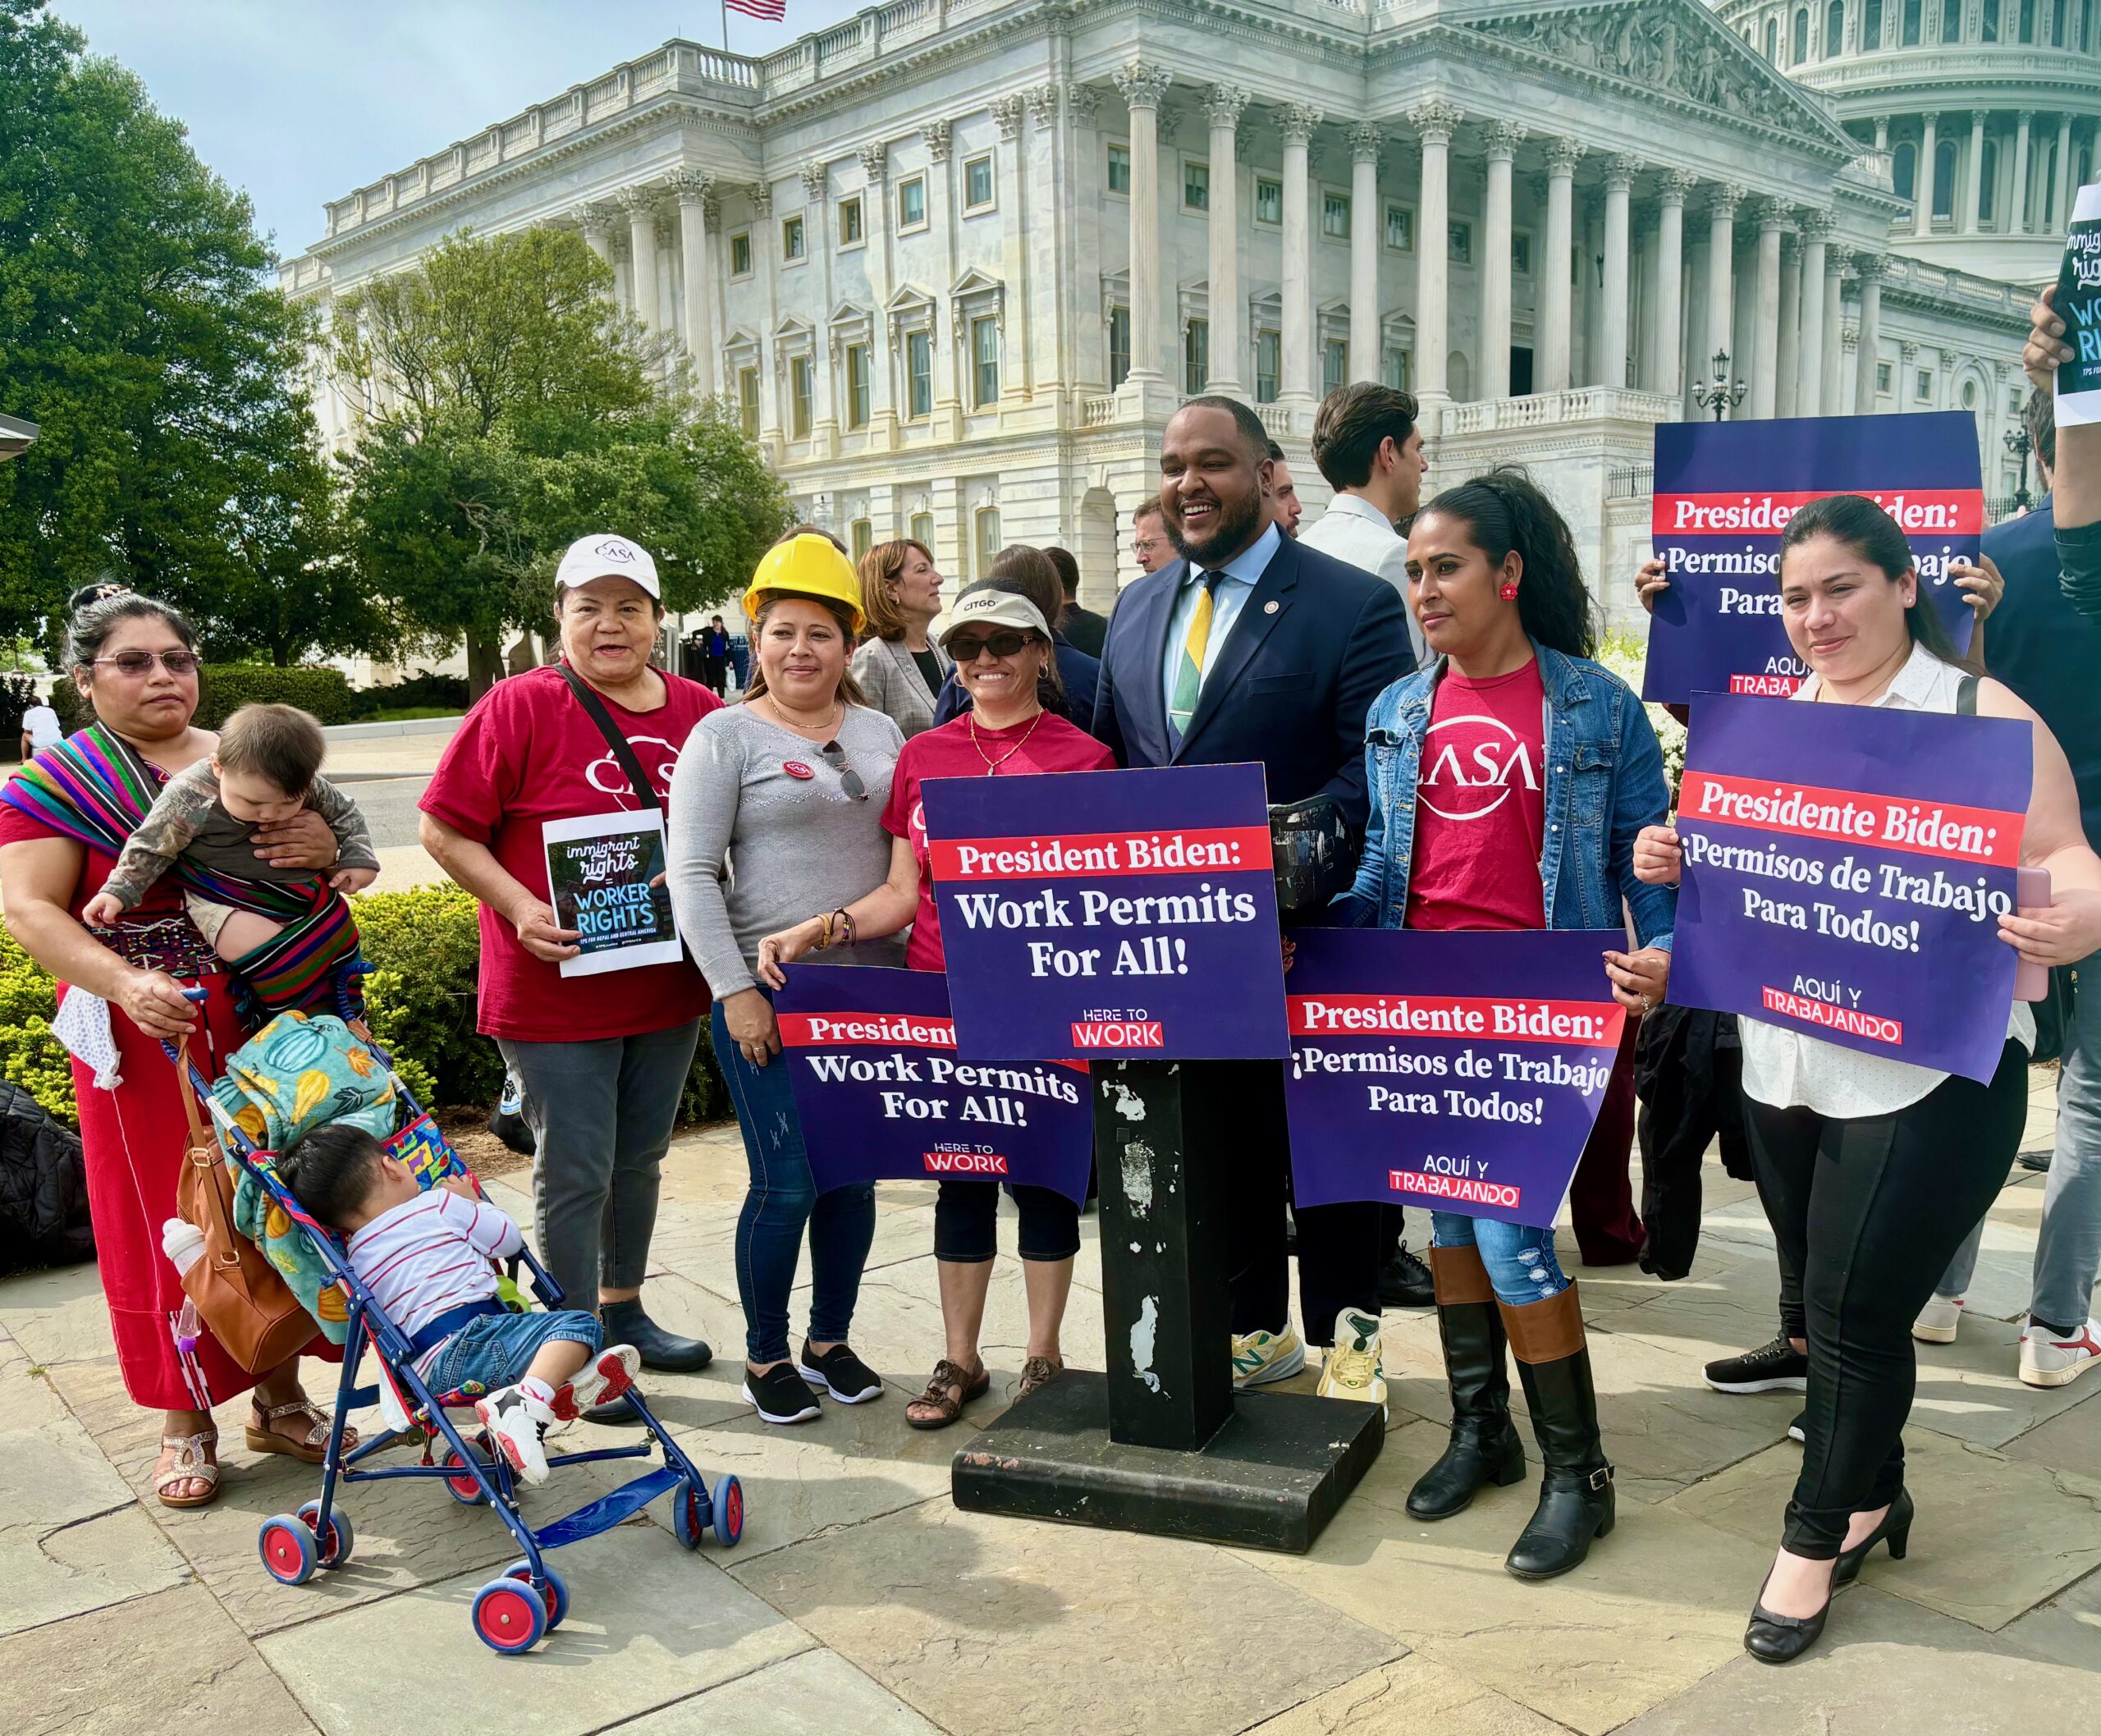 VIDEO/PHOTOS: U.S. Rep. García (D-IL); State Rep. Martinez (D-MD); Labor, Business, Community Leaders and Impacted Families Urge Biden to Provide Work Permits for Long-Term Immigrants